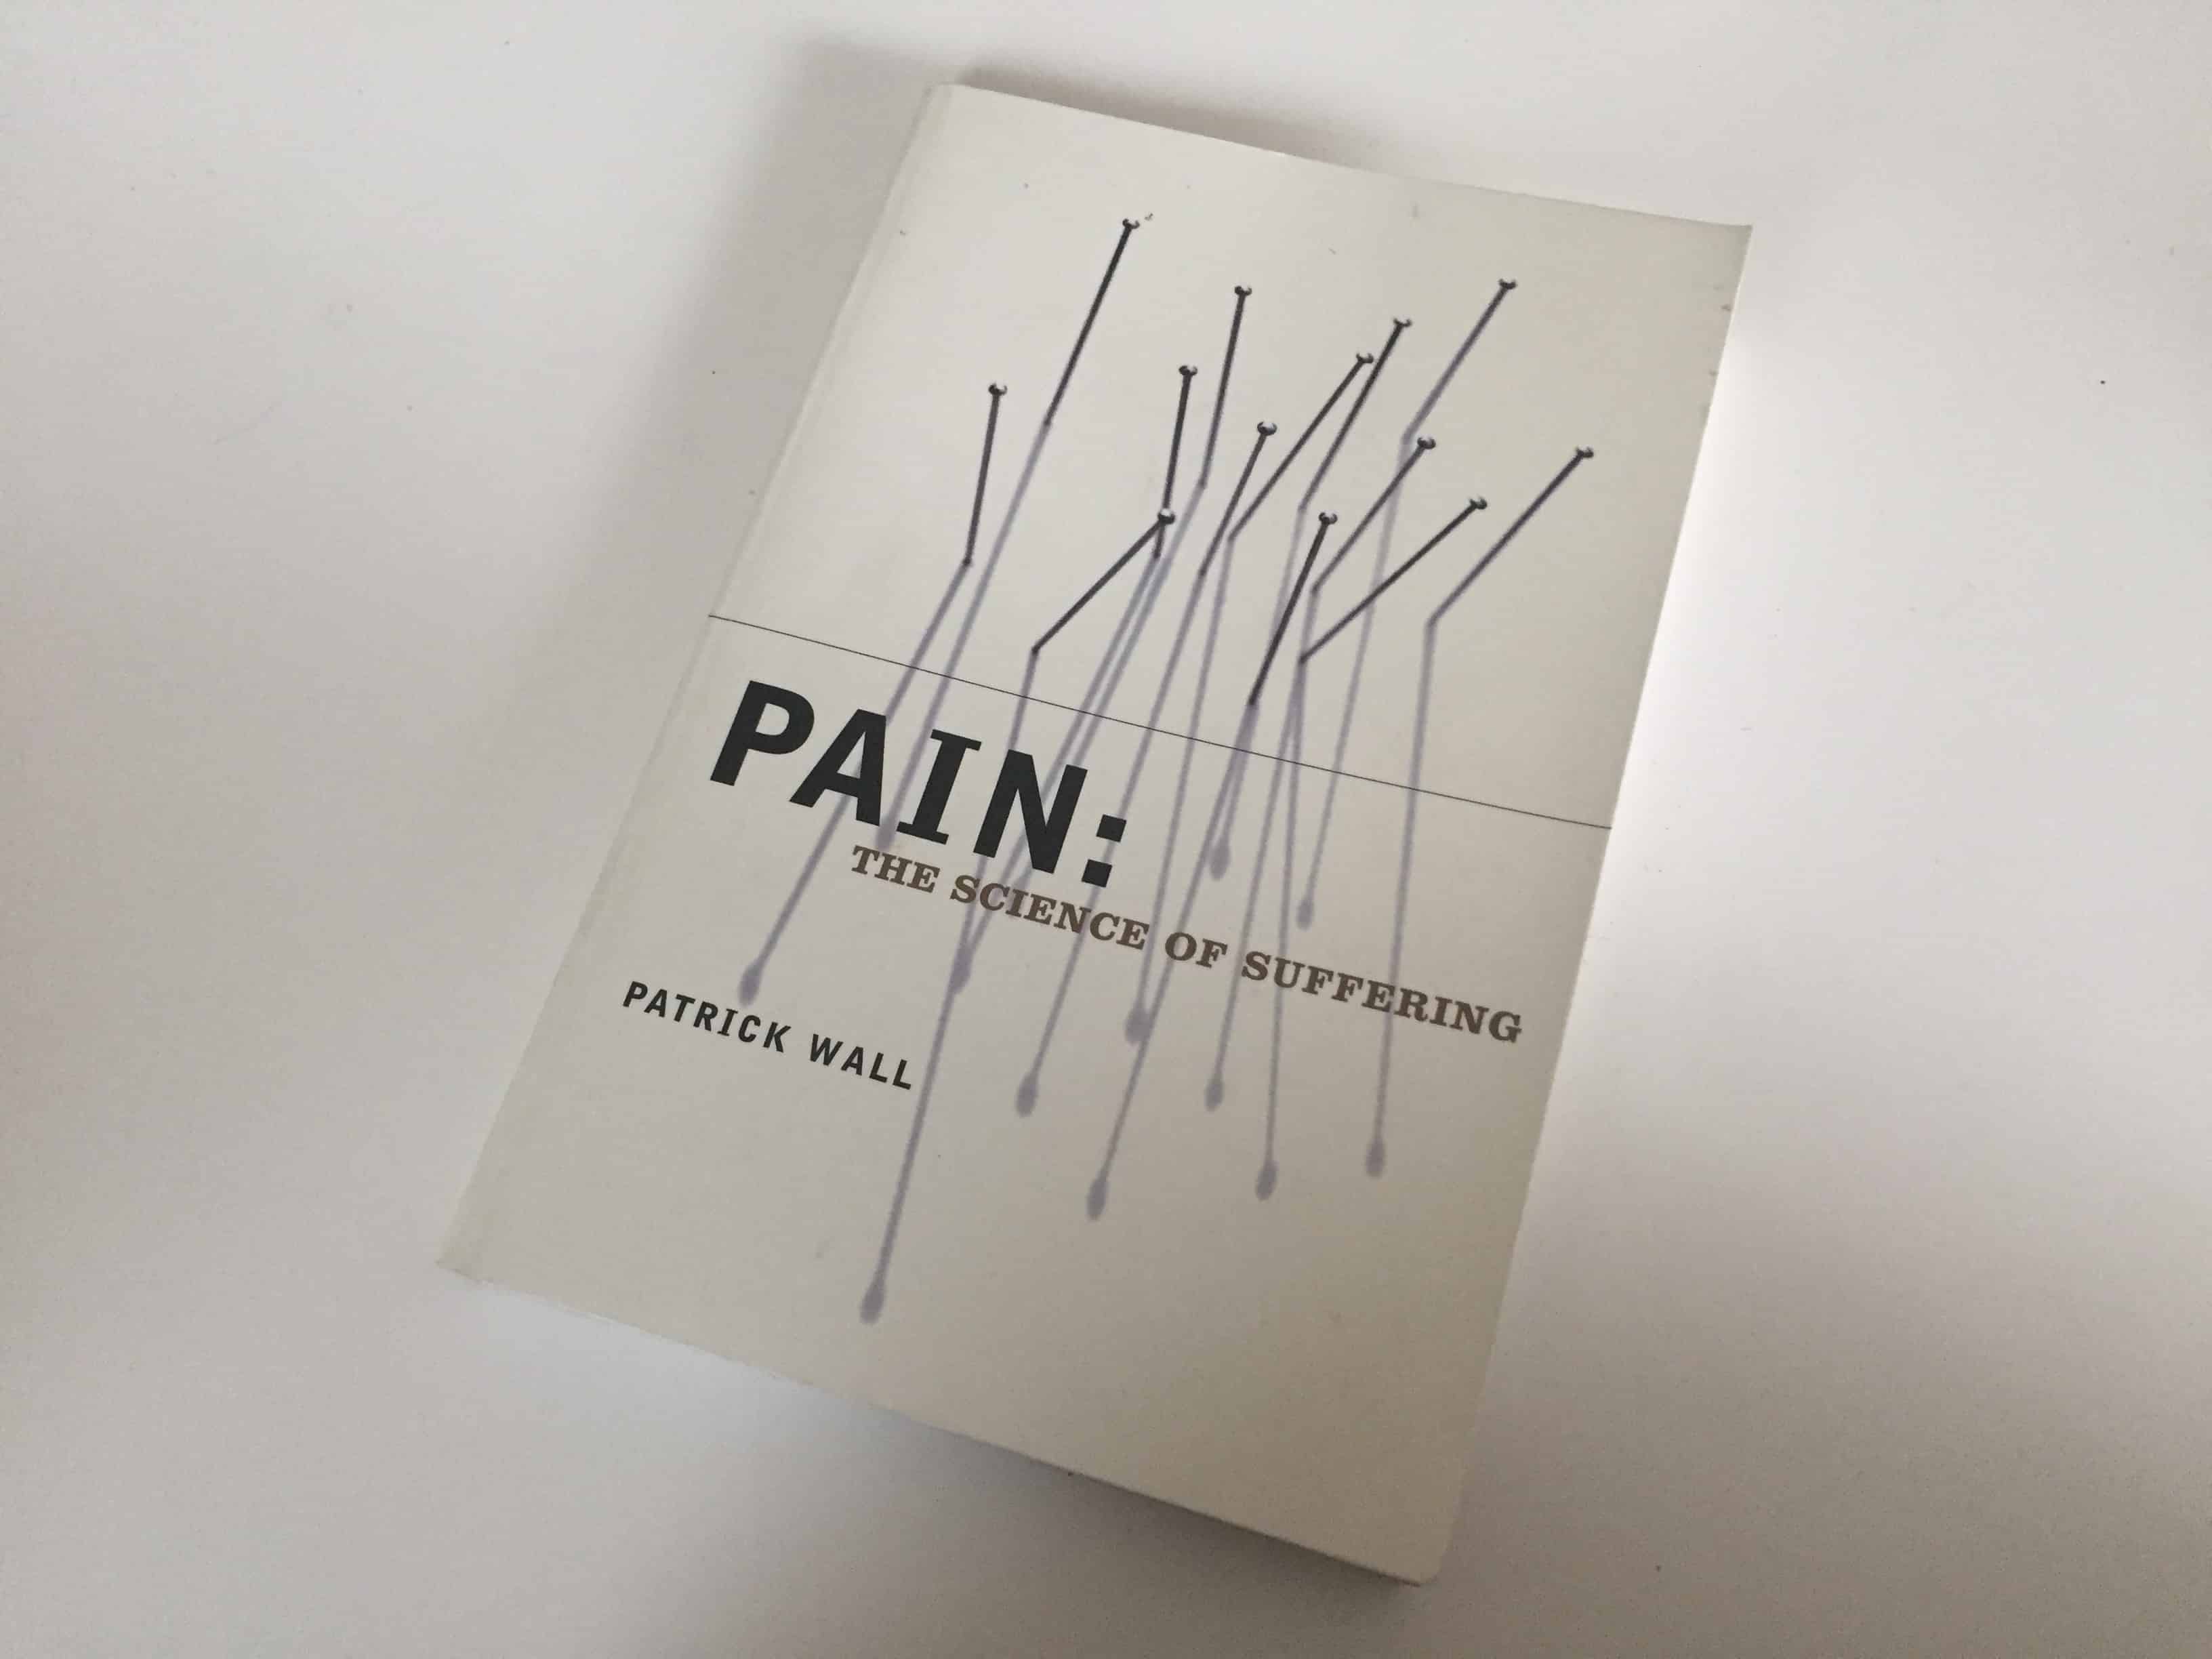 Pain is complicated - this is described in a classic text by Patrick Wall